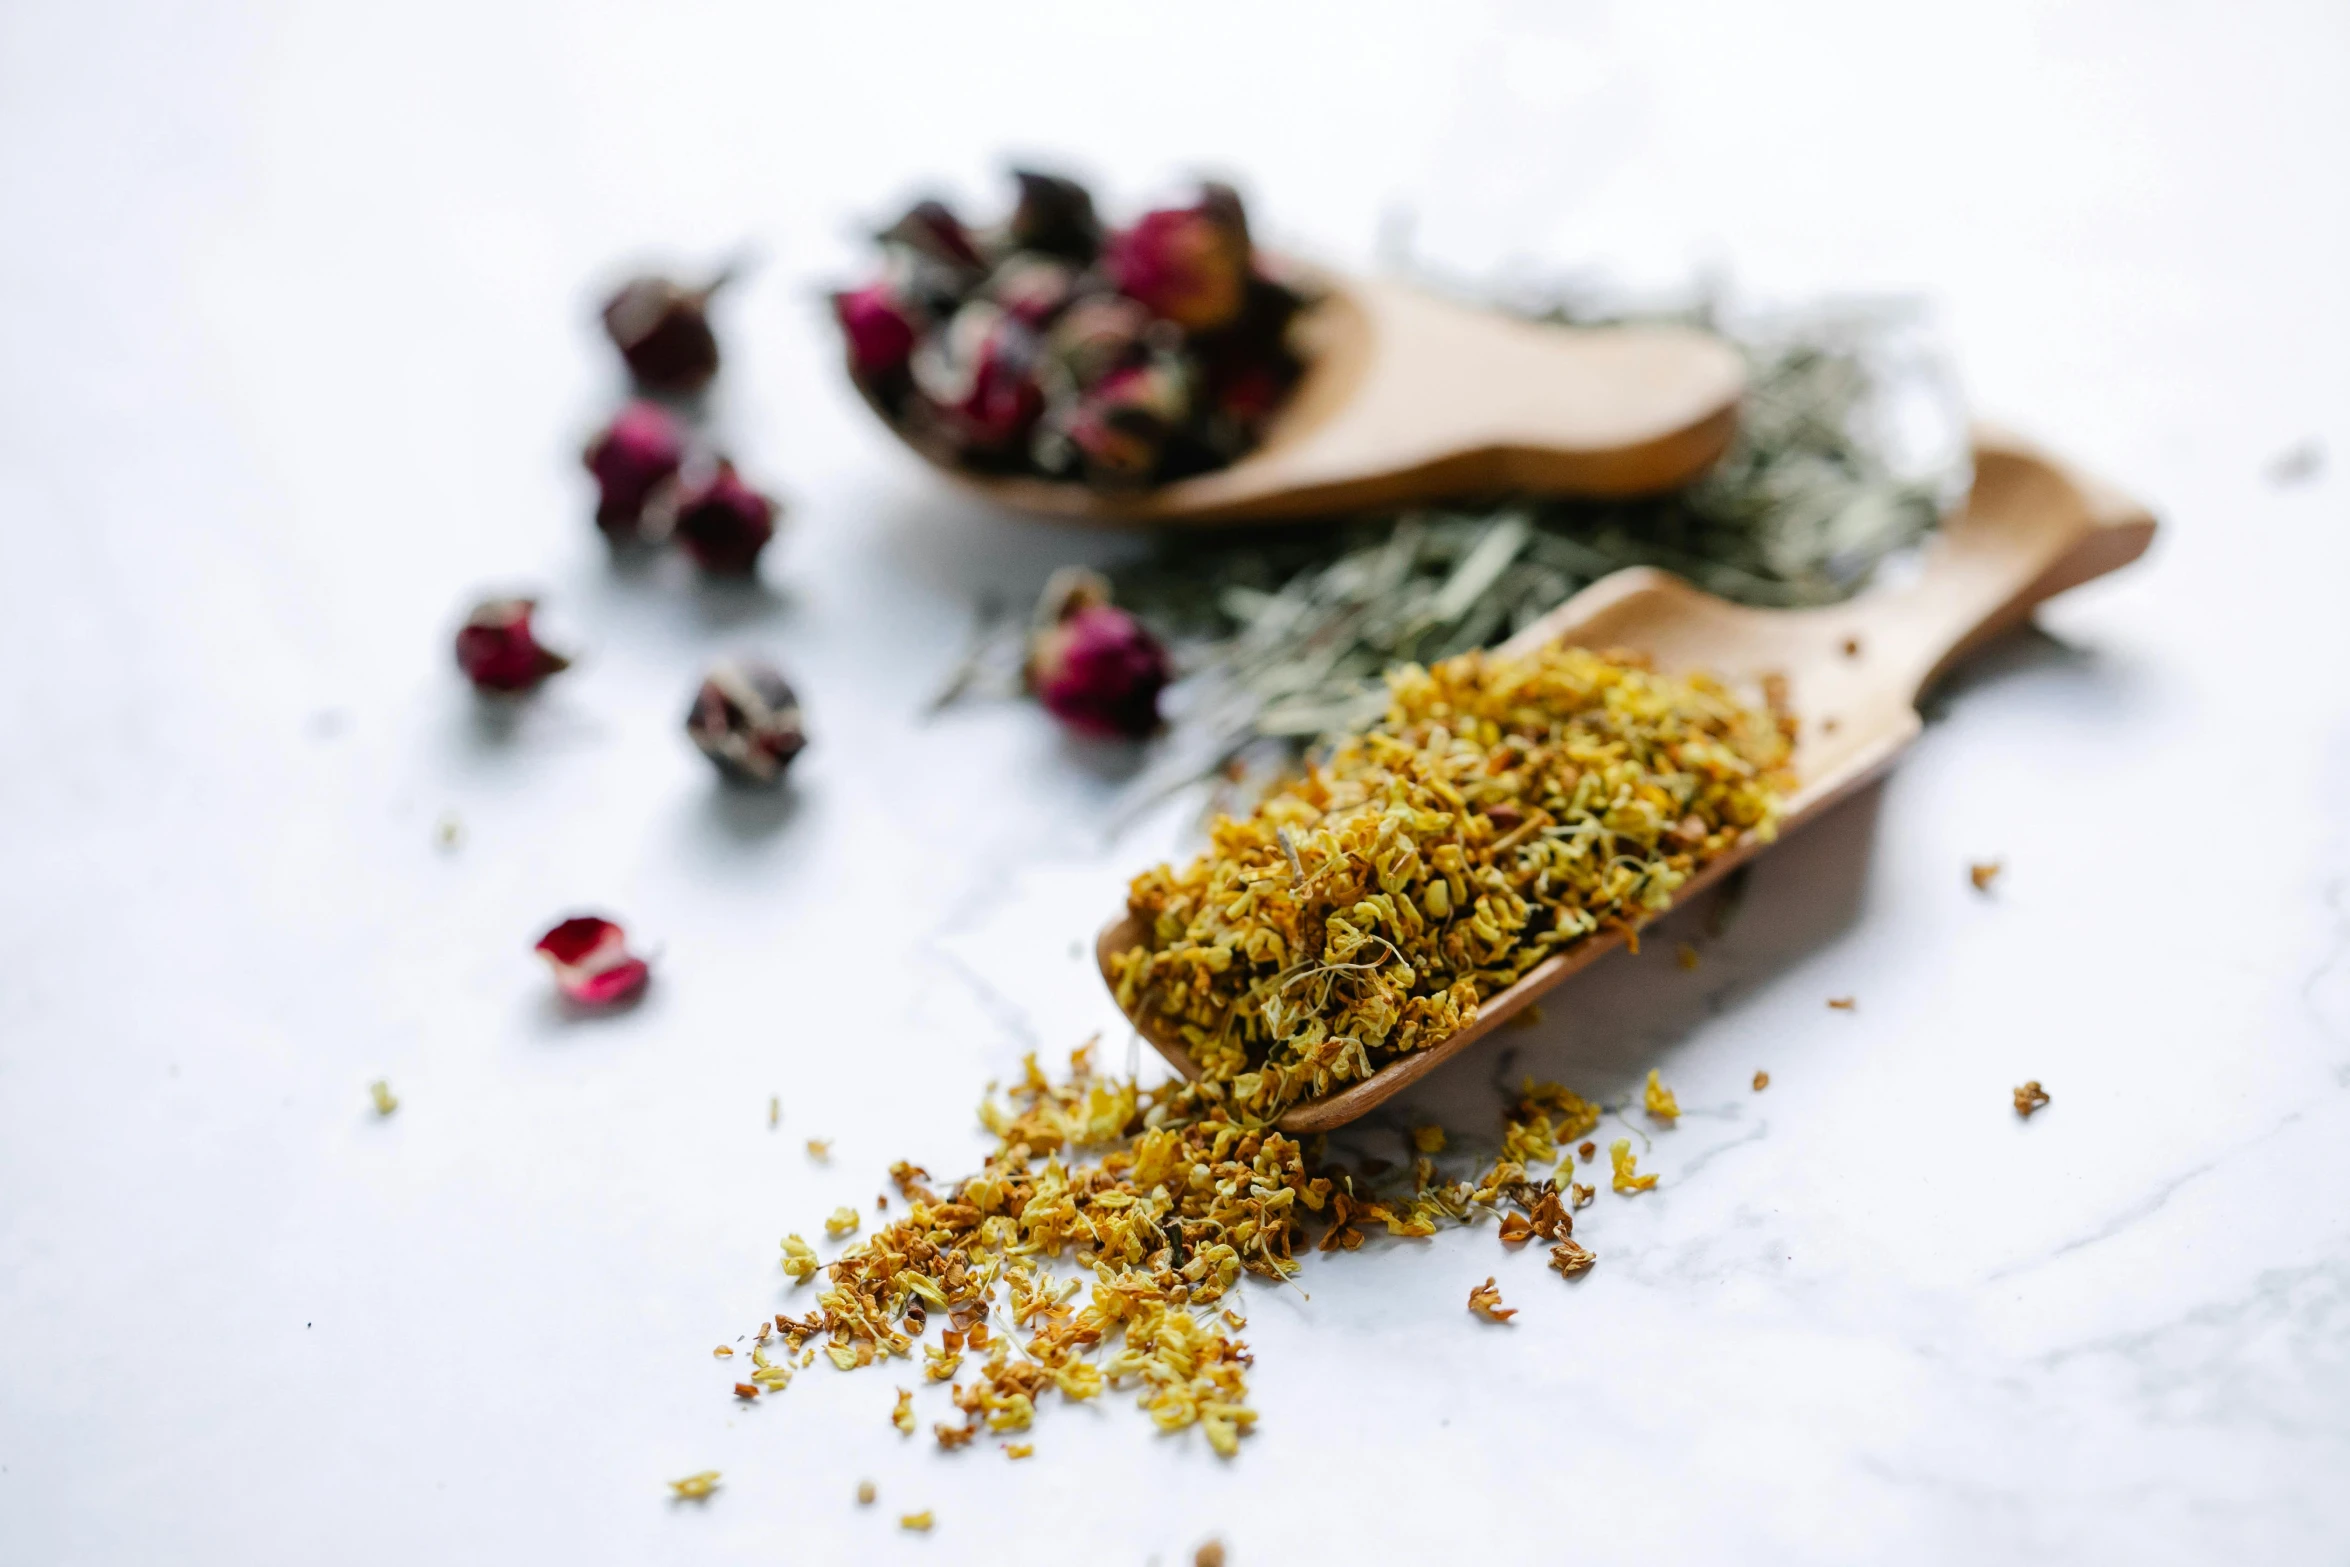 a wooden spoon filled with dried flowers next to a wooden spoon filled with dried flowers, by Matthias Stom, trending on unsplash, hurufiyya, yellow robe, food particles, on a white table, miniature product photo